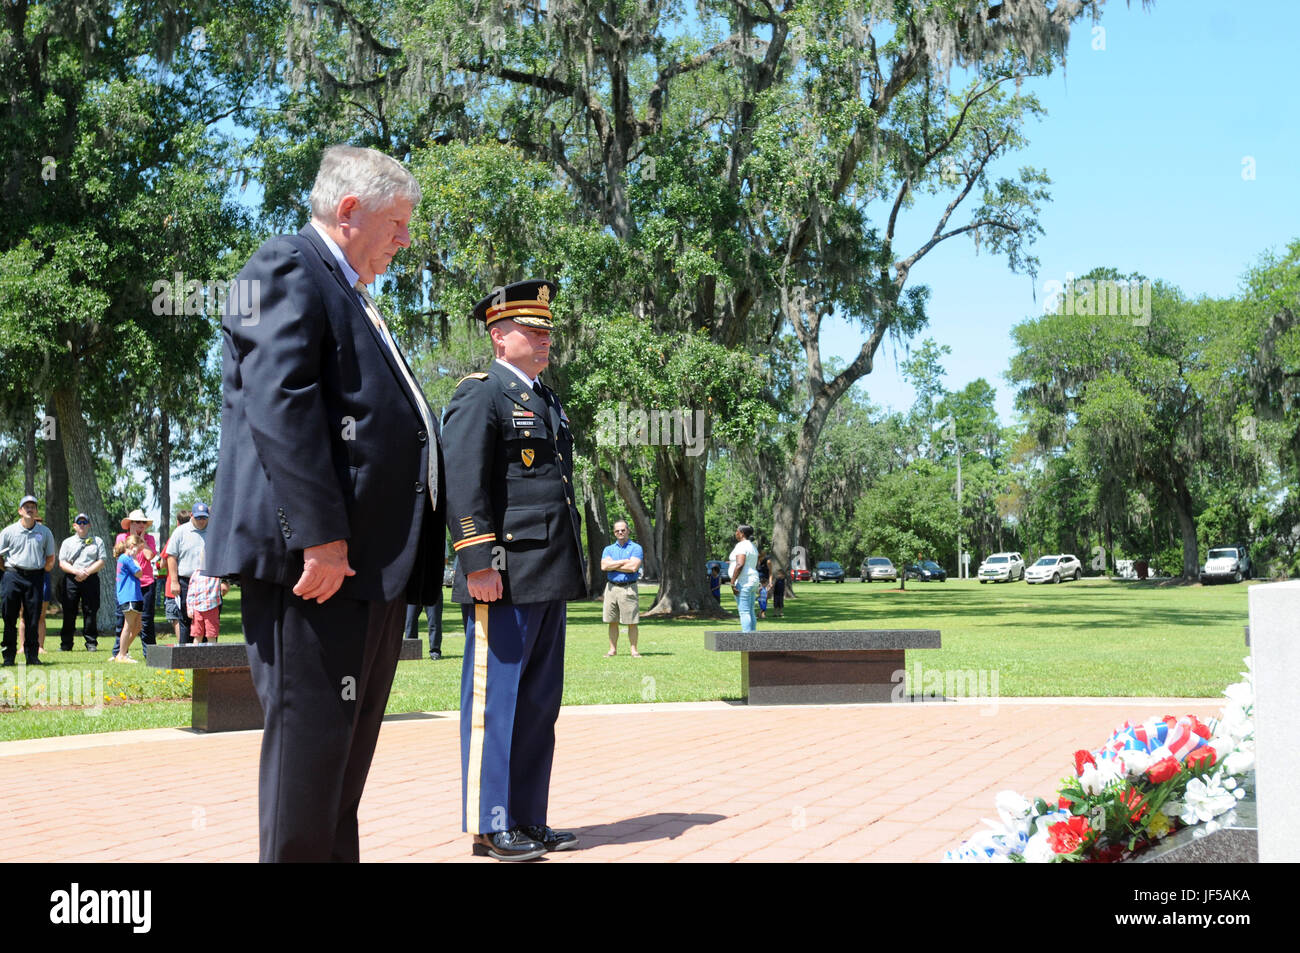 Harold Fowler, mayor of Richmond Hill, Ga., and Lt. Col. Chris Mcreery, commander of the 87th Combat Sustainment Support Battalion, 3rd Infantry Division Sustainment Brigade, take in a moment of silence after laying a wreath at the Richmond Hill Veterans’ Monument during the Richmond Hill Memorial Day Observance at J.F. Gregory Park May 29. During the ceremony, several speakers, including McCreery, spoke about the importance of remembering Fallen Servicemembers not only on Memorial Day but always and appreciating their sacrifices for Americans’ freedom. (U.S. Army photo by Sgt. 1st Class Ben K Stock Photo